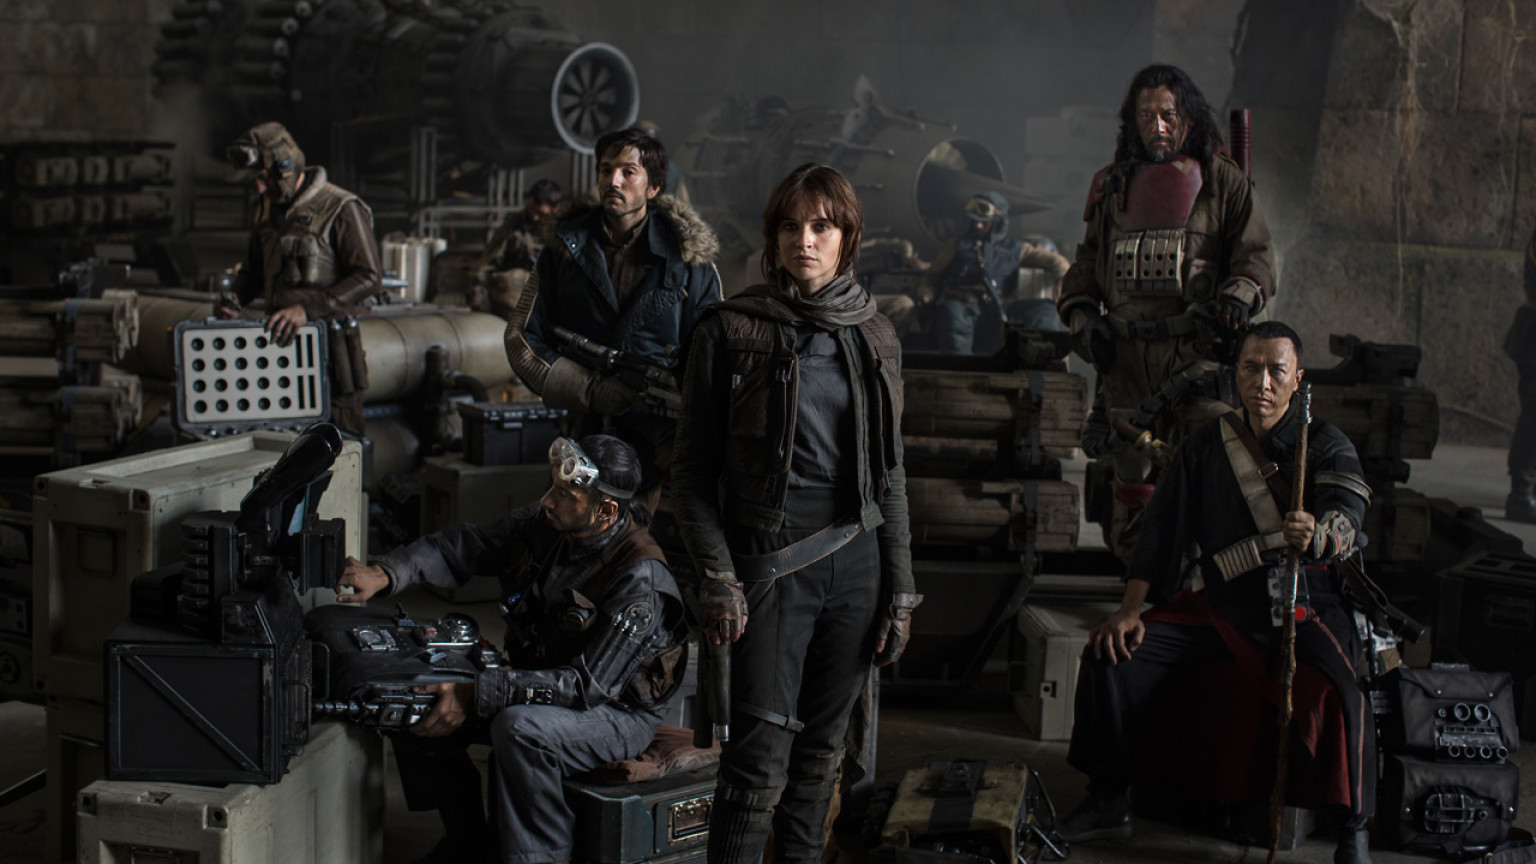 Review for the new Sci-Fi Fantasy blockbuster ROGUE ONE, opening in theatres December 16th, 2016. | Review for the new Sci-Fi Fantasy blockbuster ROGUE ONE, opening in theatres December 16th, 2016.